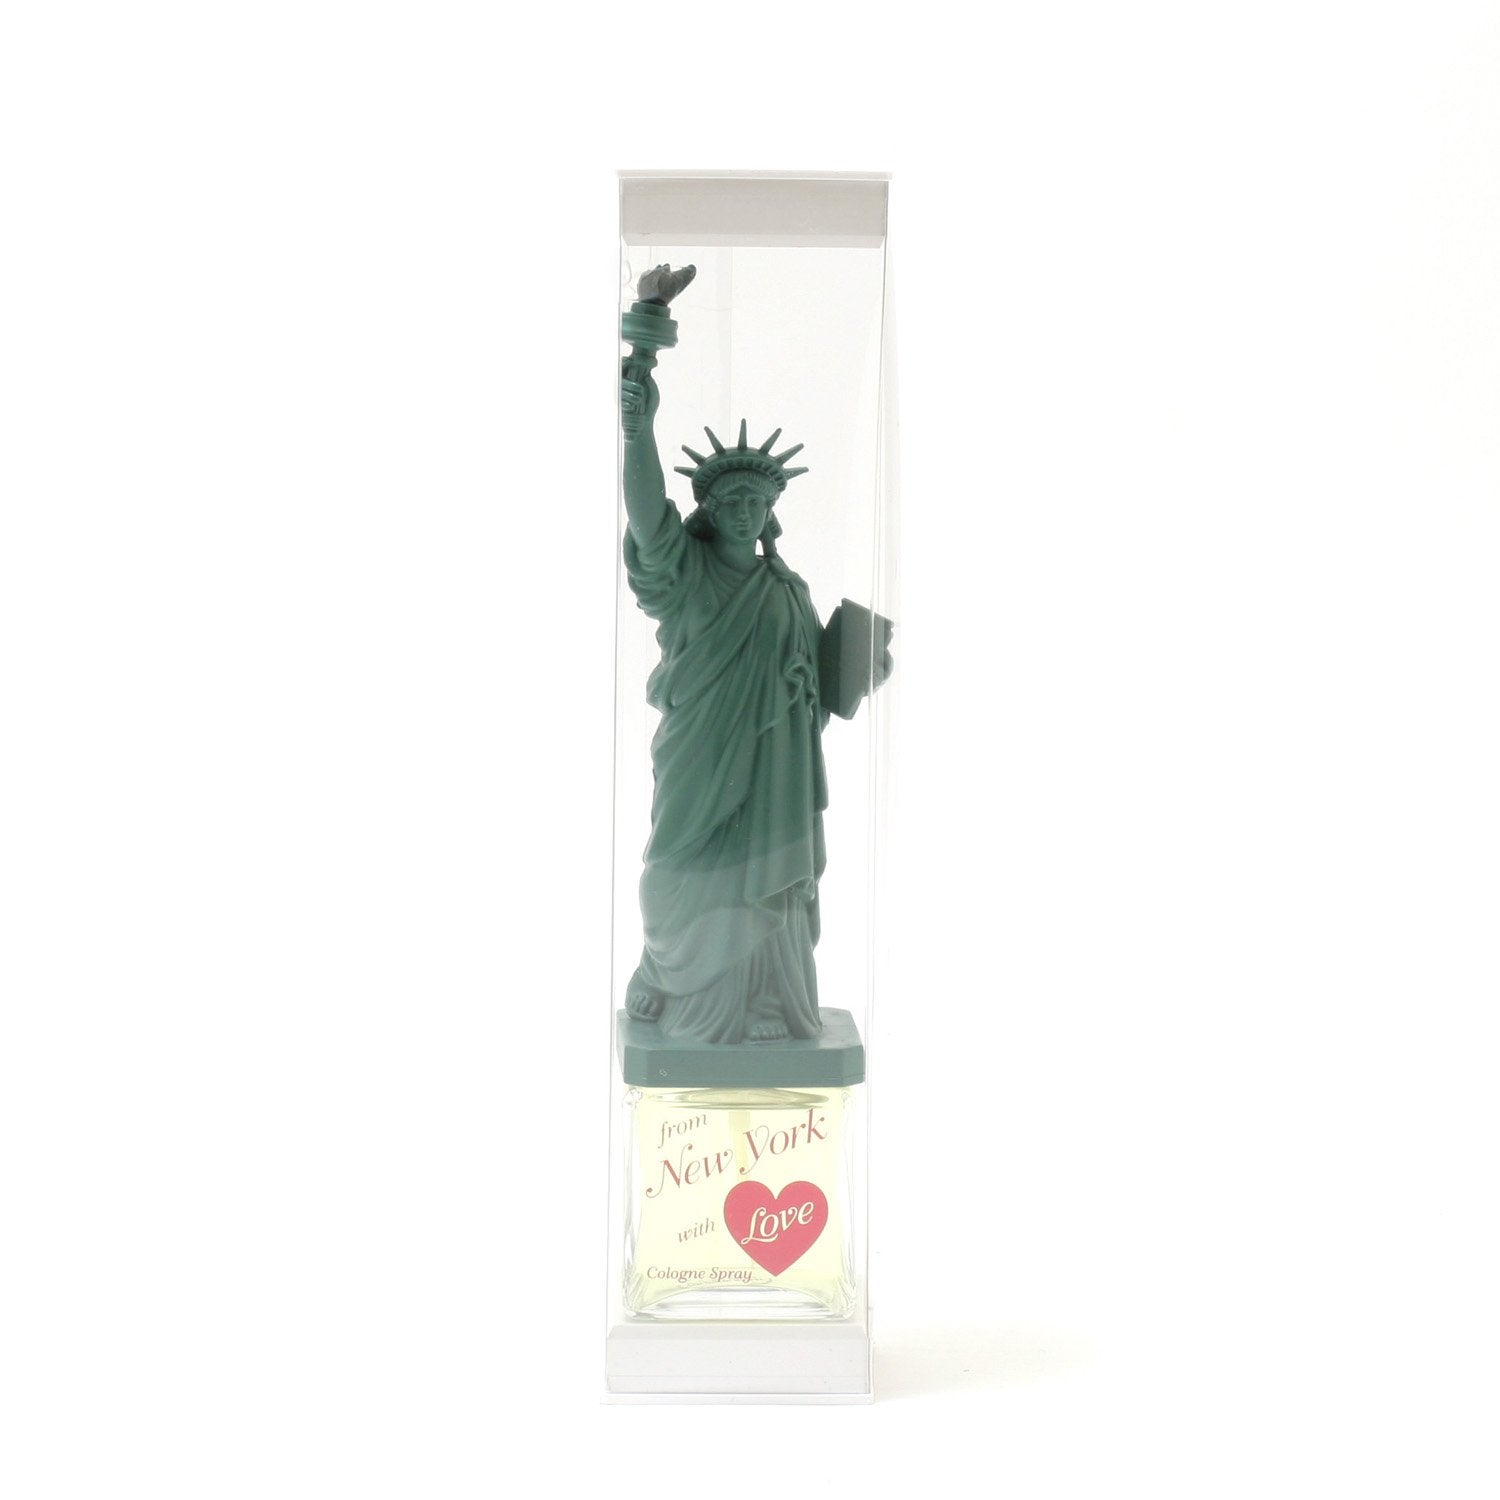 Perfume - STATUE OF LIBERTY FOR WOMEN -  COLOGNE SPRAY, 1.7 OZ